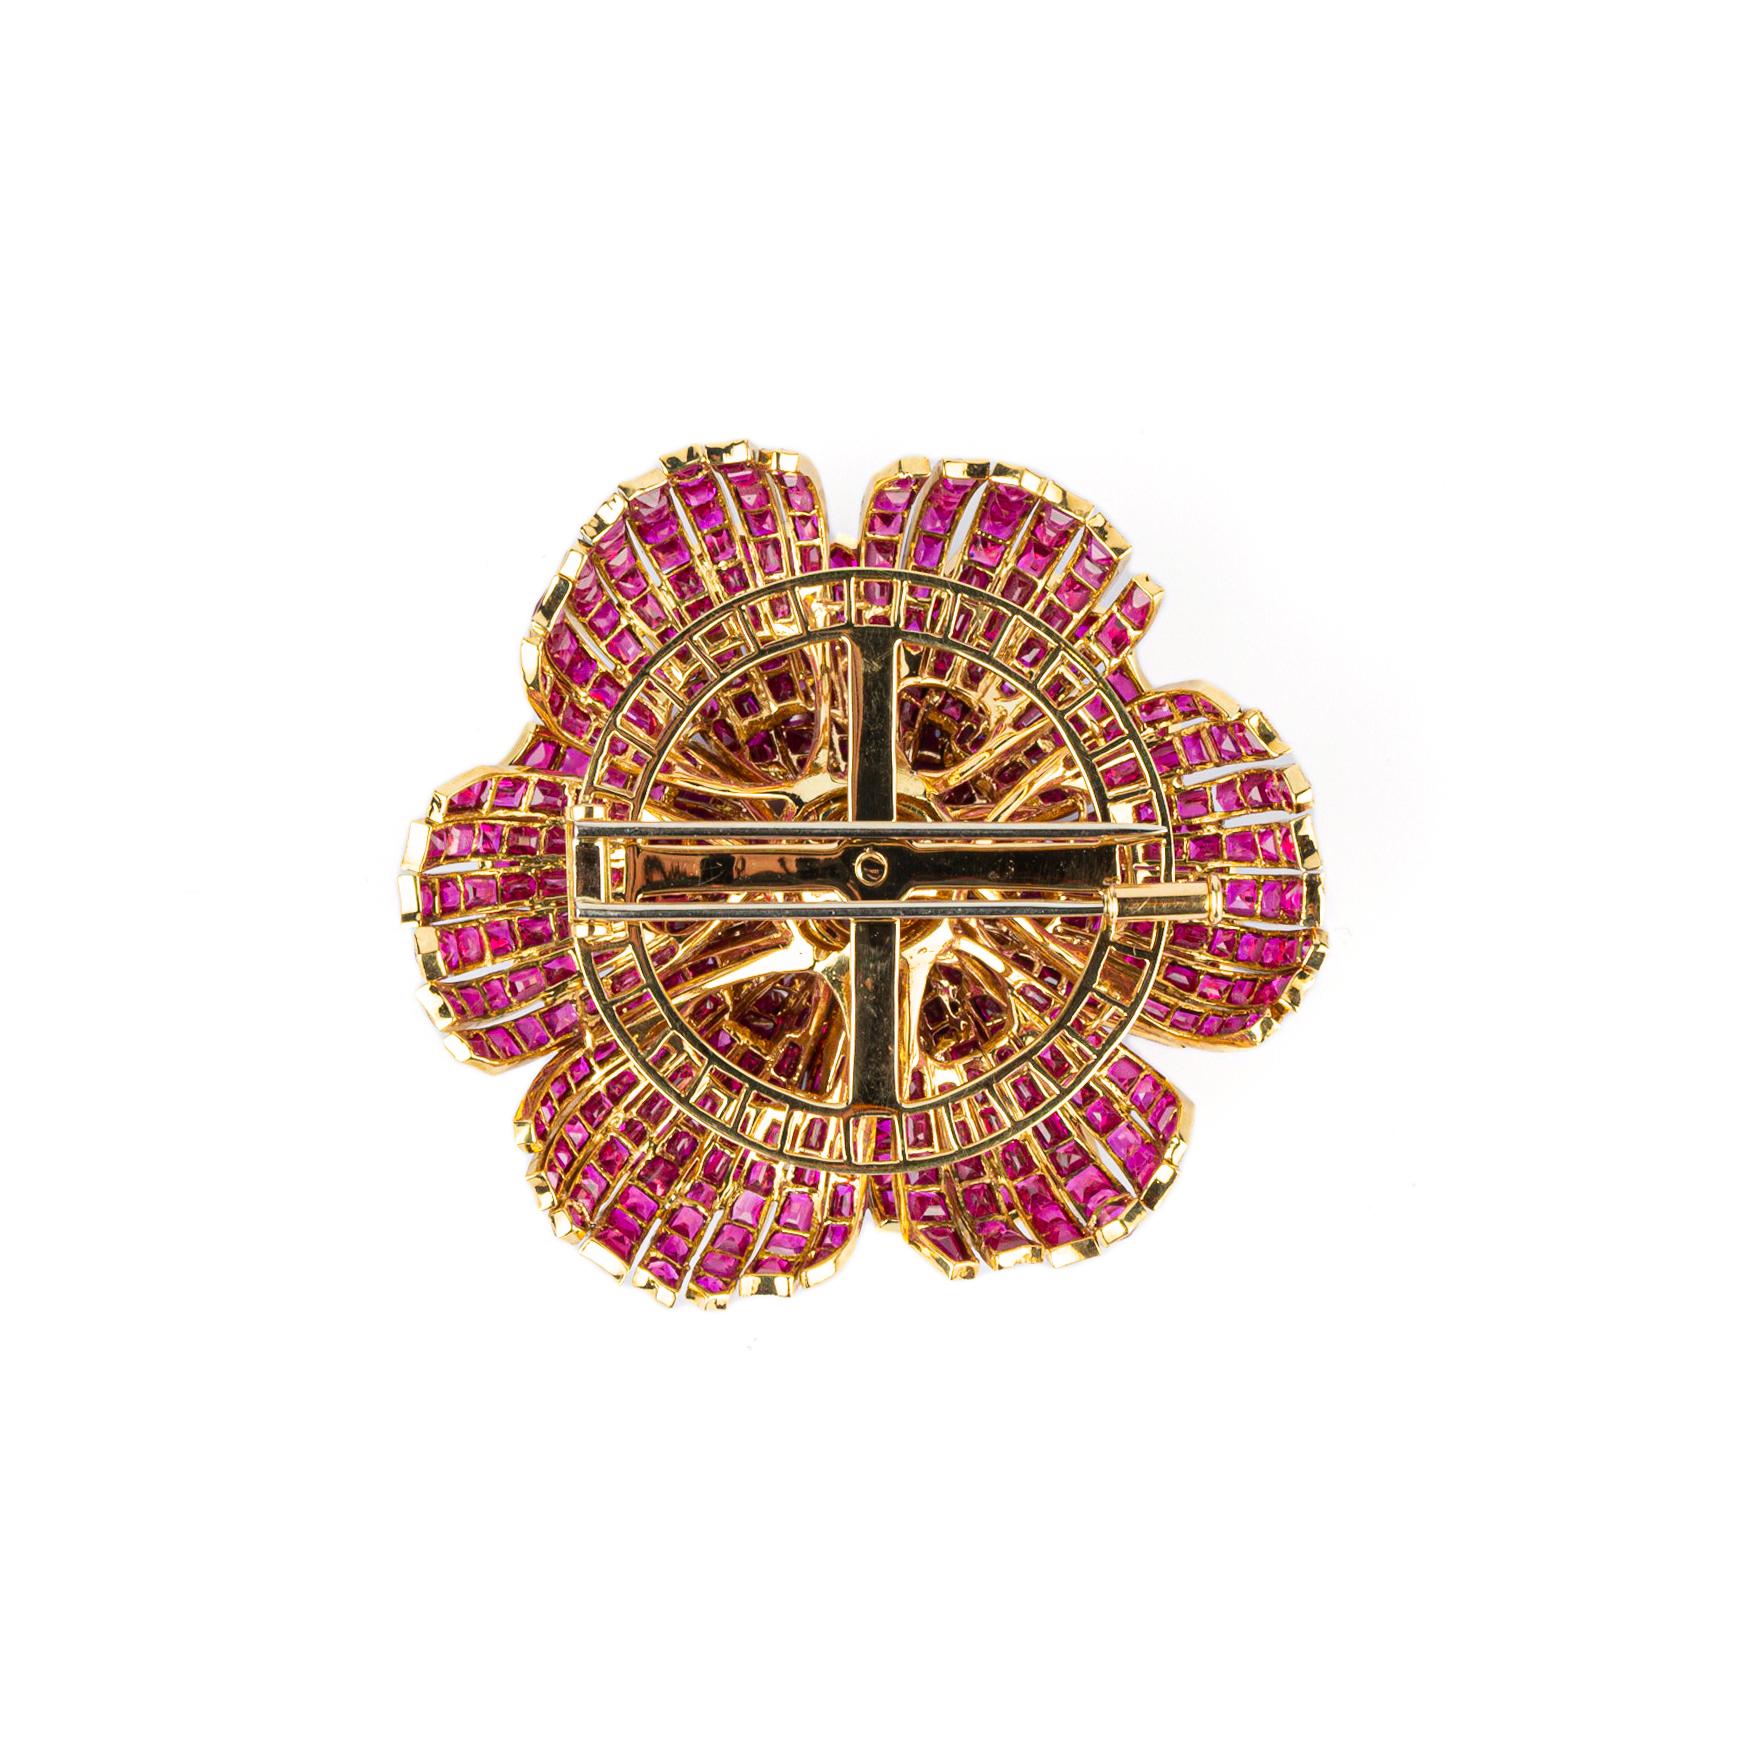 An Exquisite Flower Brooch with carrè set rubies, centering an Old Cut Diamond (1.5-2 cts) mounted in 18k Yellow Gold. Made in Italy, circa 1965. 